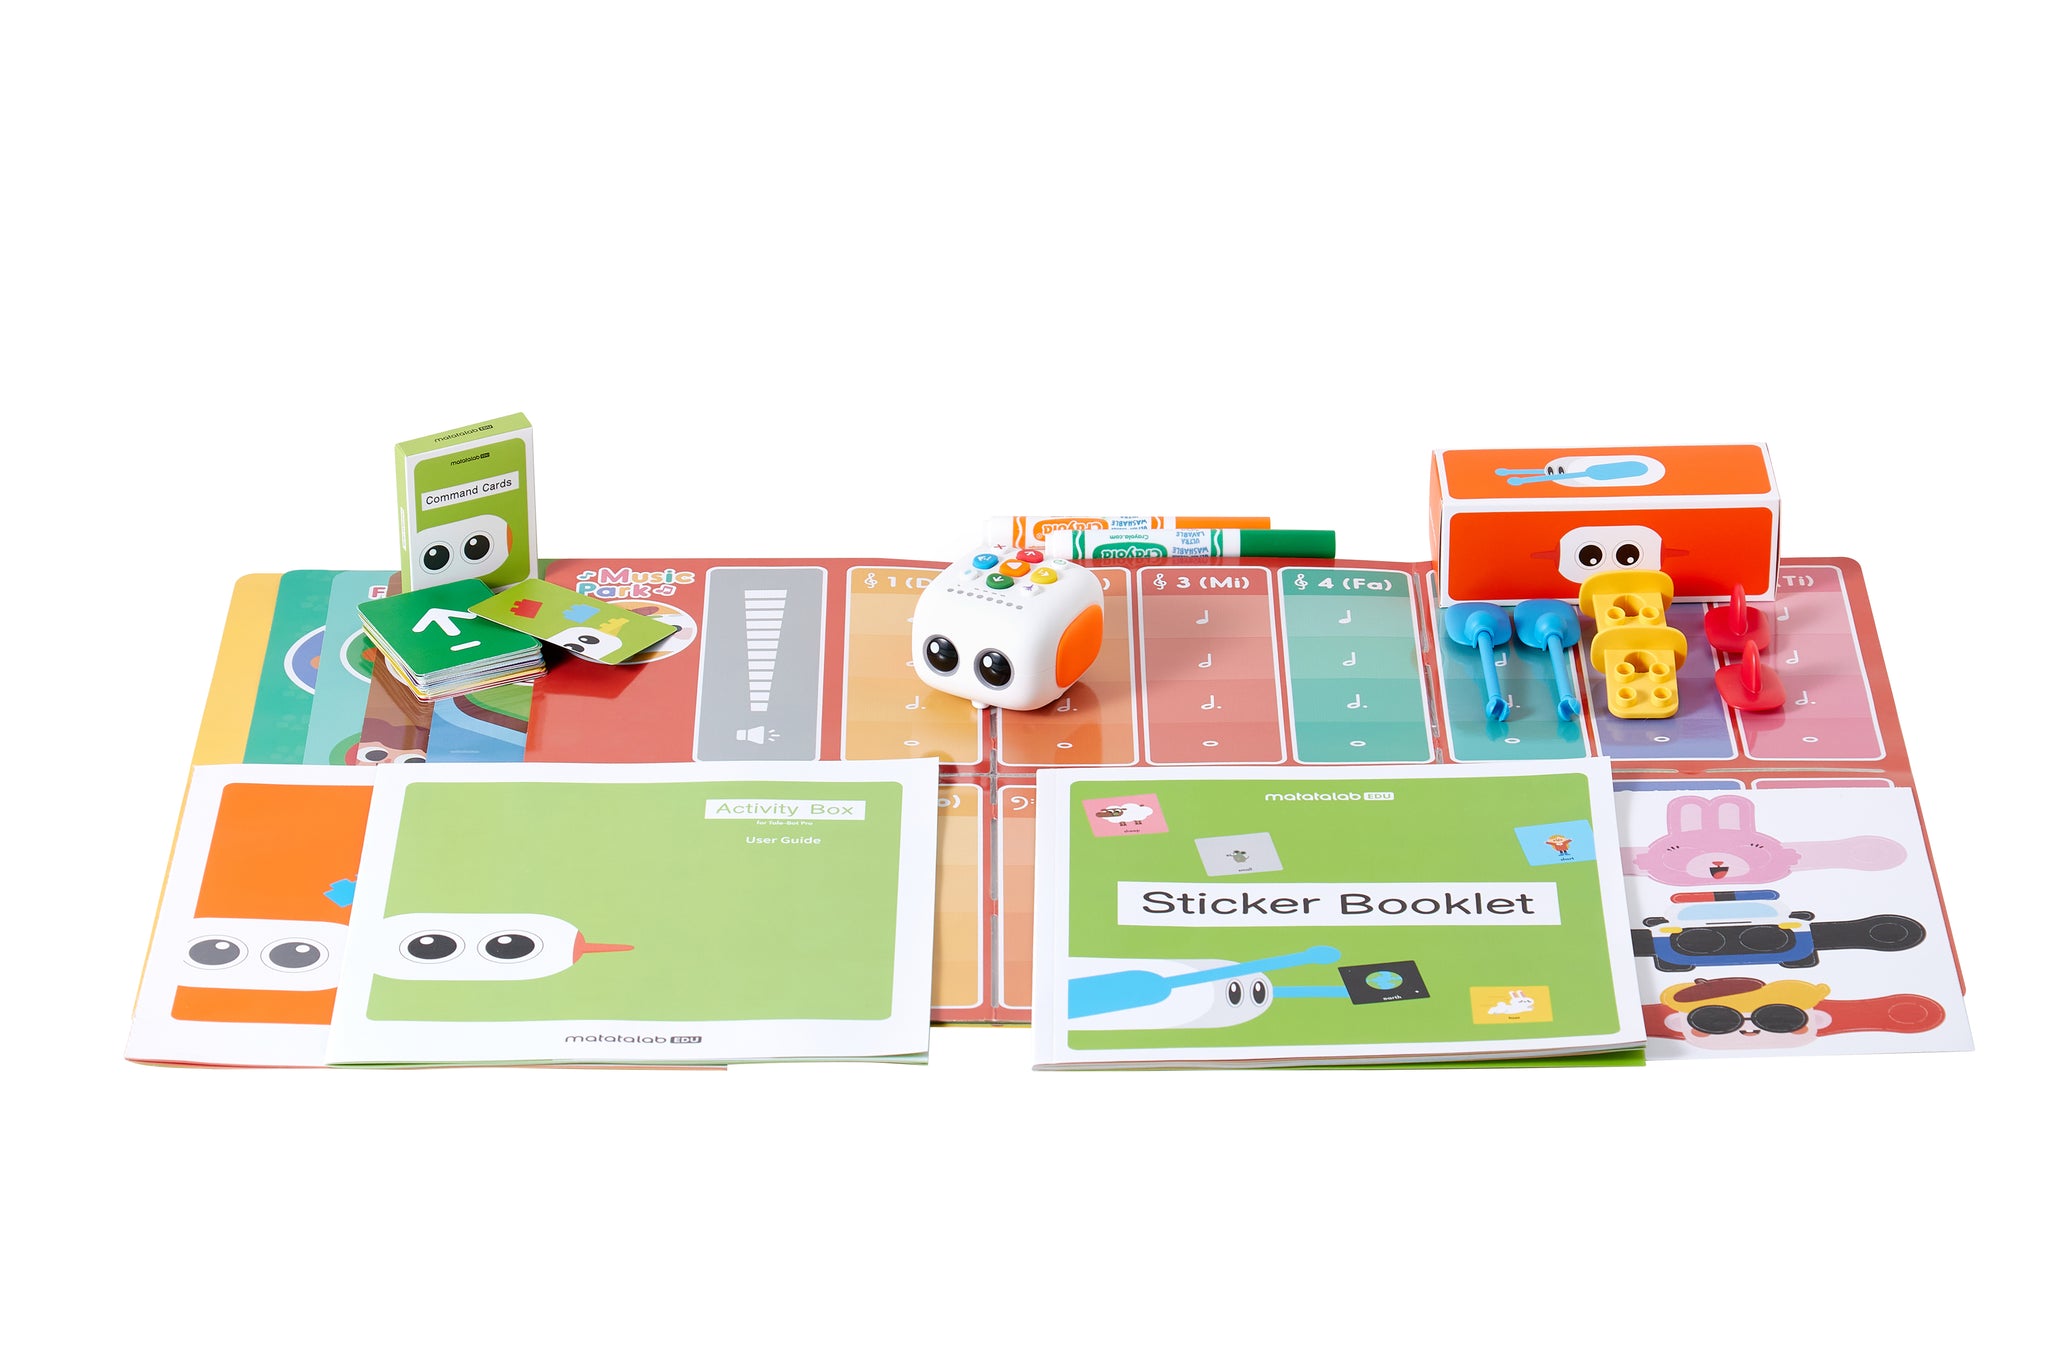 Tale-Bot Pro Hands-on Coding Robot Set Education Edition – Matatalab